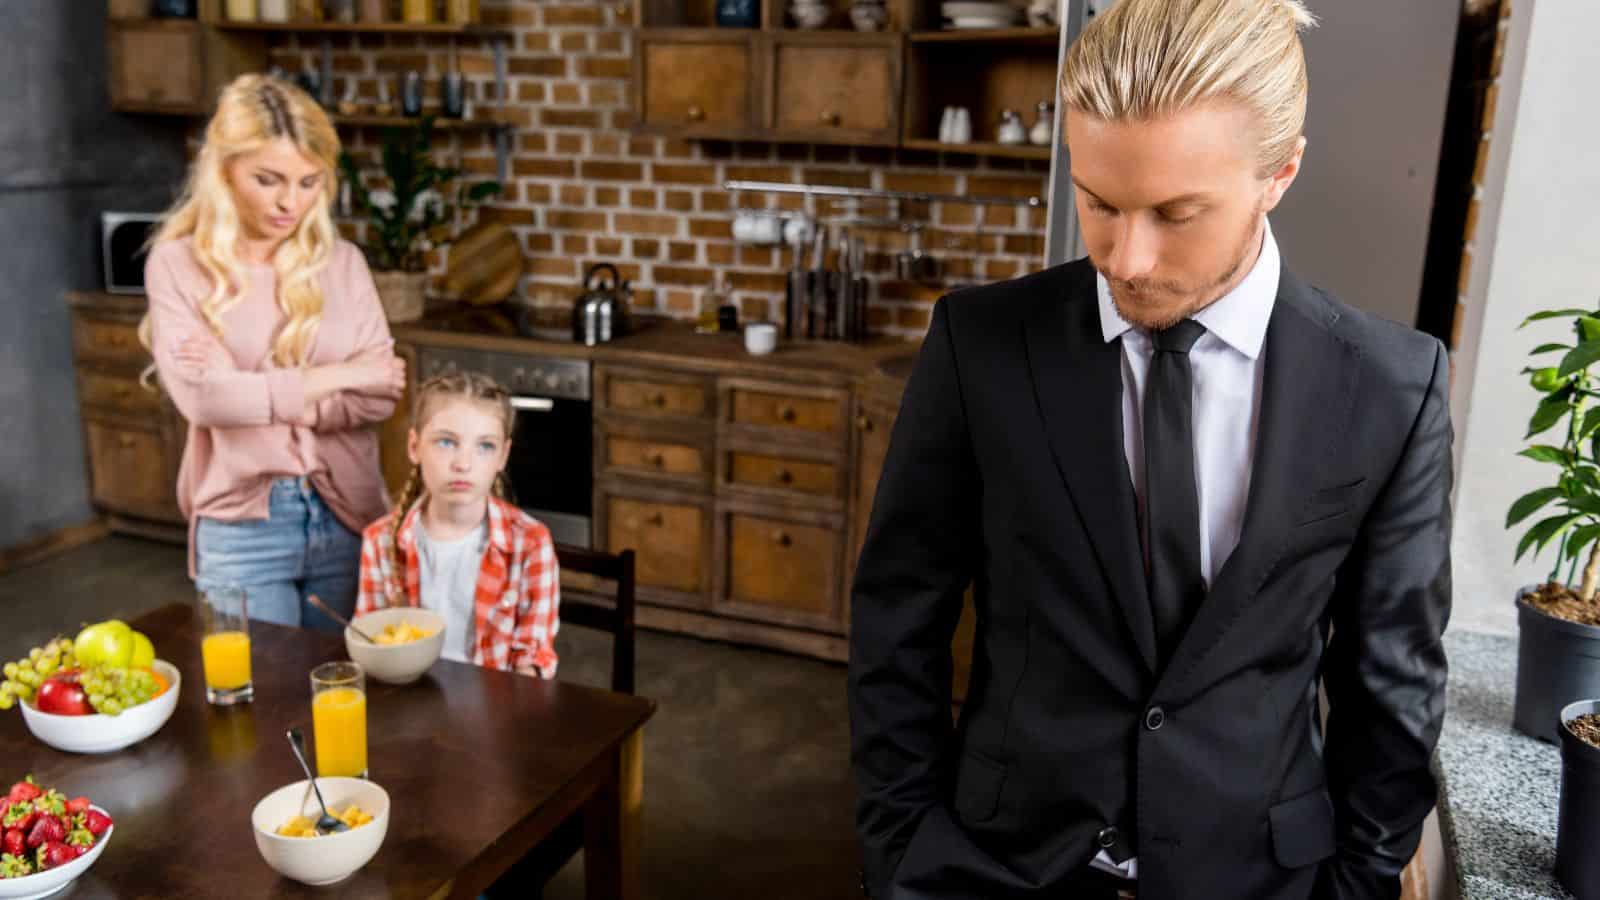 family eating upset with man - woman - child